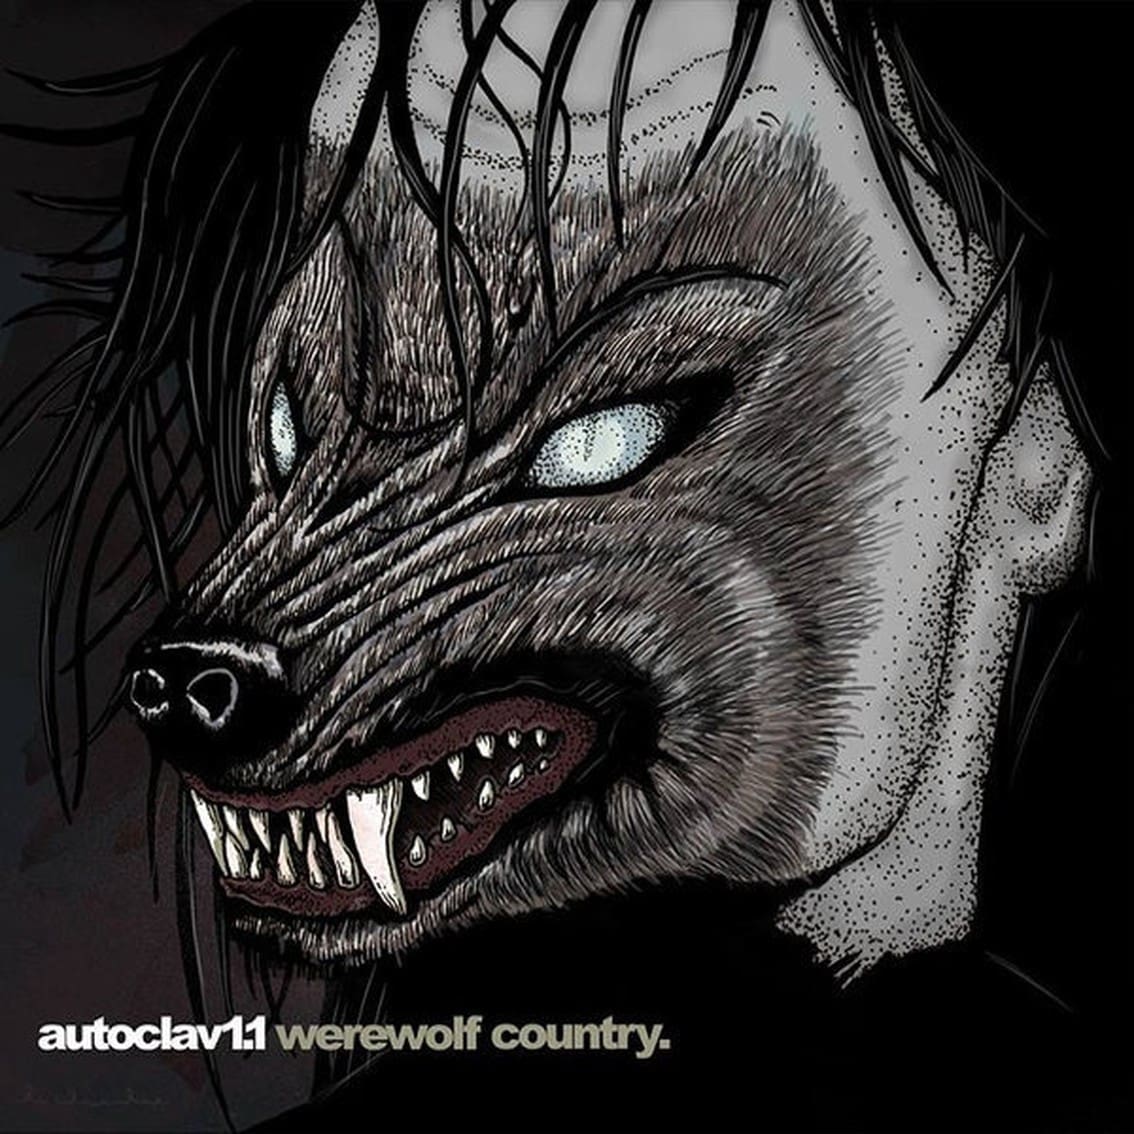 Autoclav 1.1 goes 'Werewolf Country' on new album